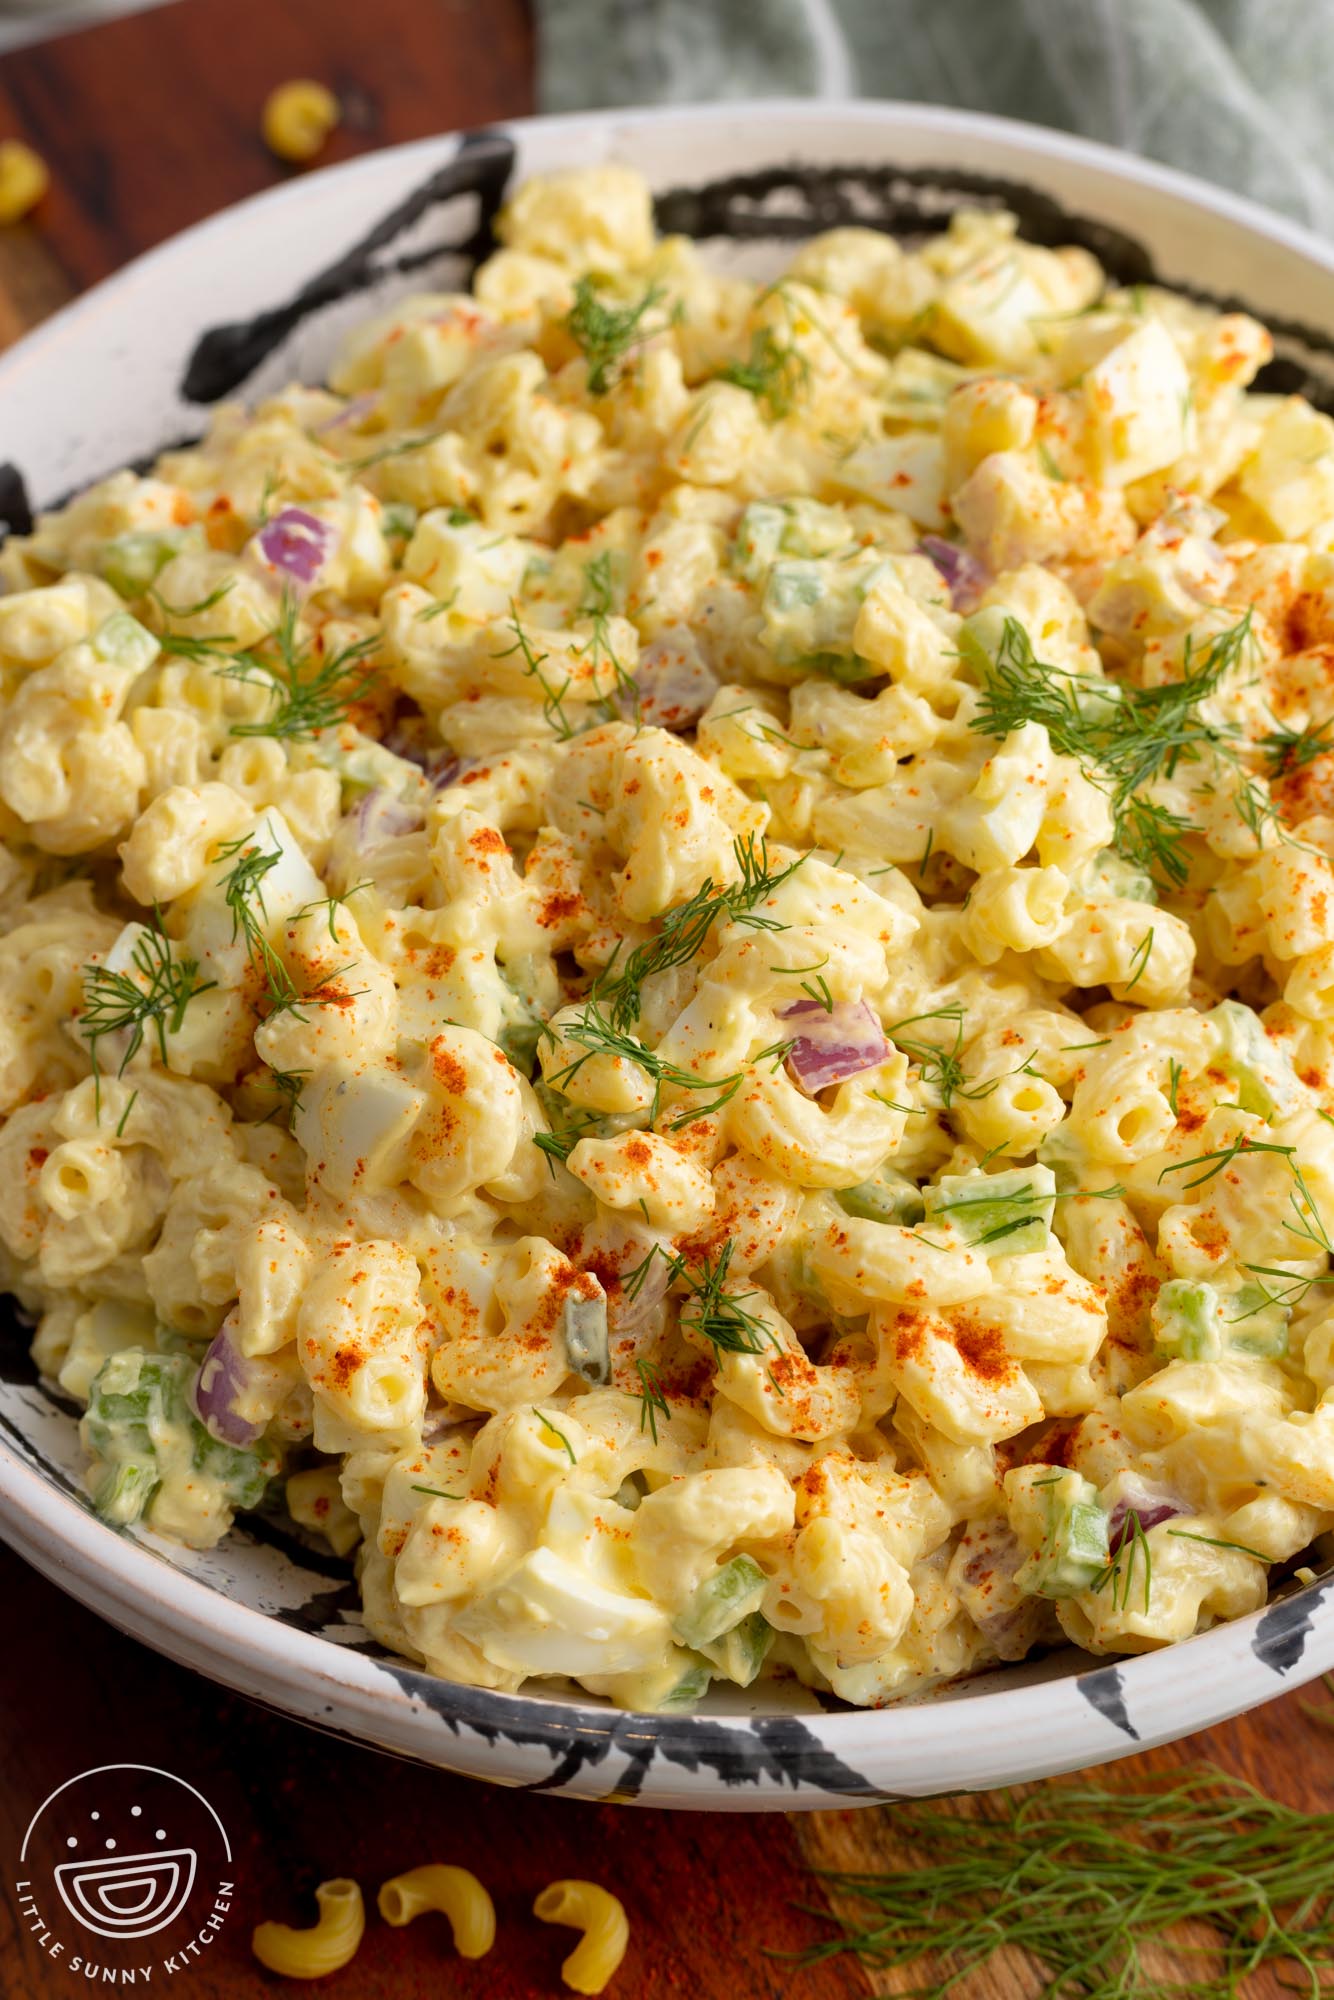 Deviled egg macaroni salad in a large bowl, garnished with dill and paprika.